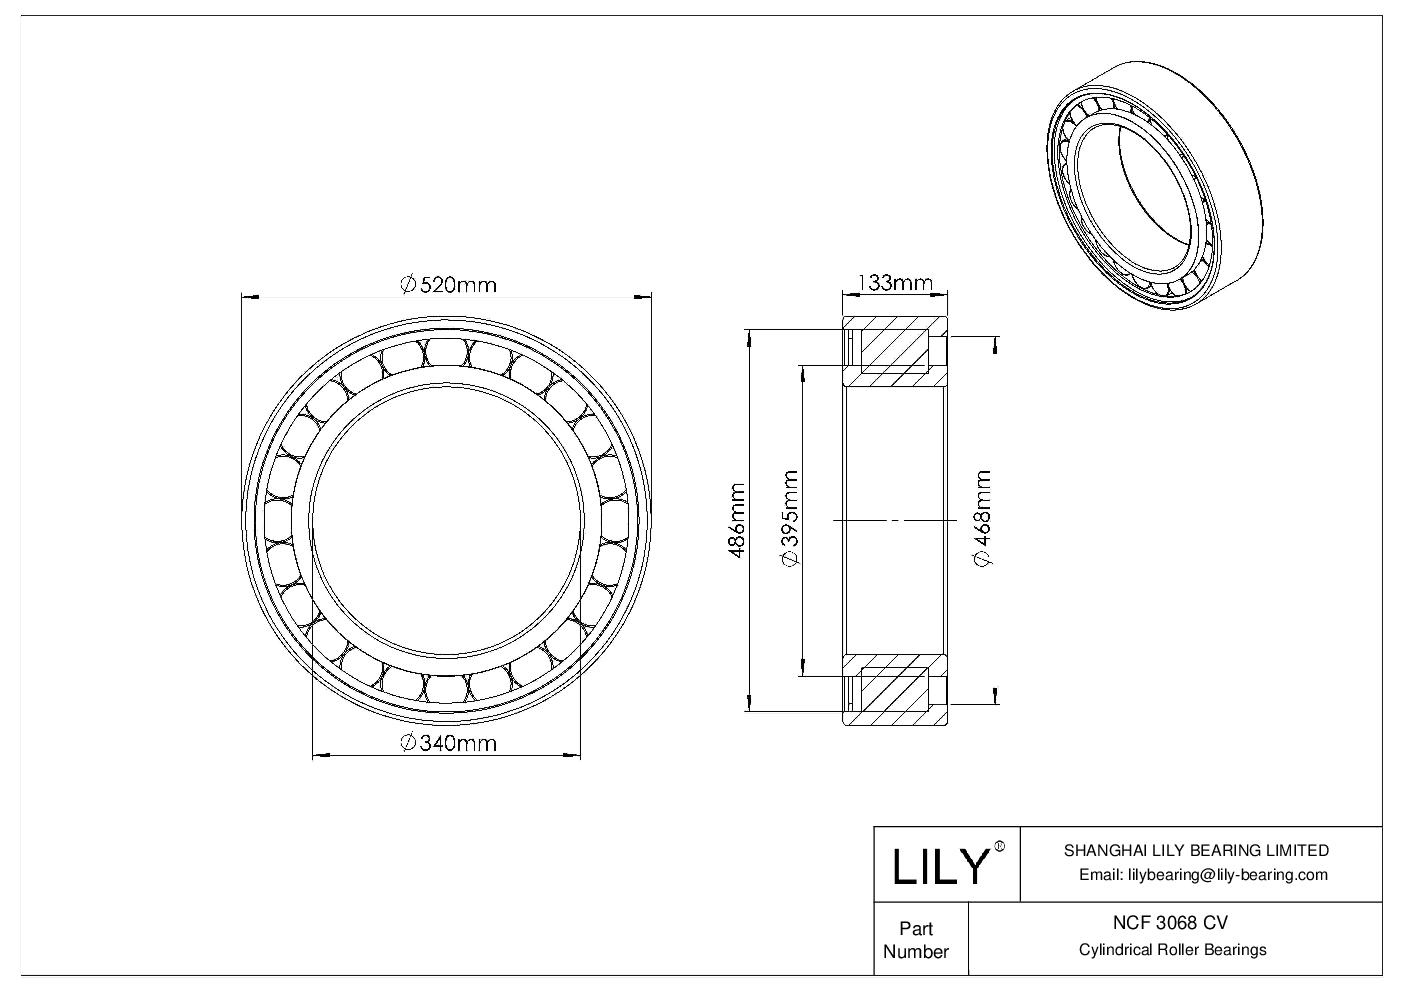 NCF 3068 CV Single Row Full Complement Cylindrical Roller Bearings cad drawing